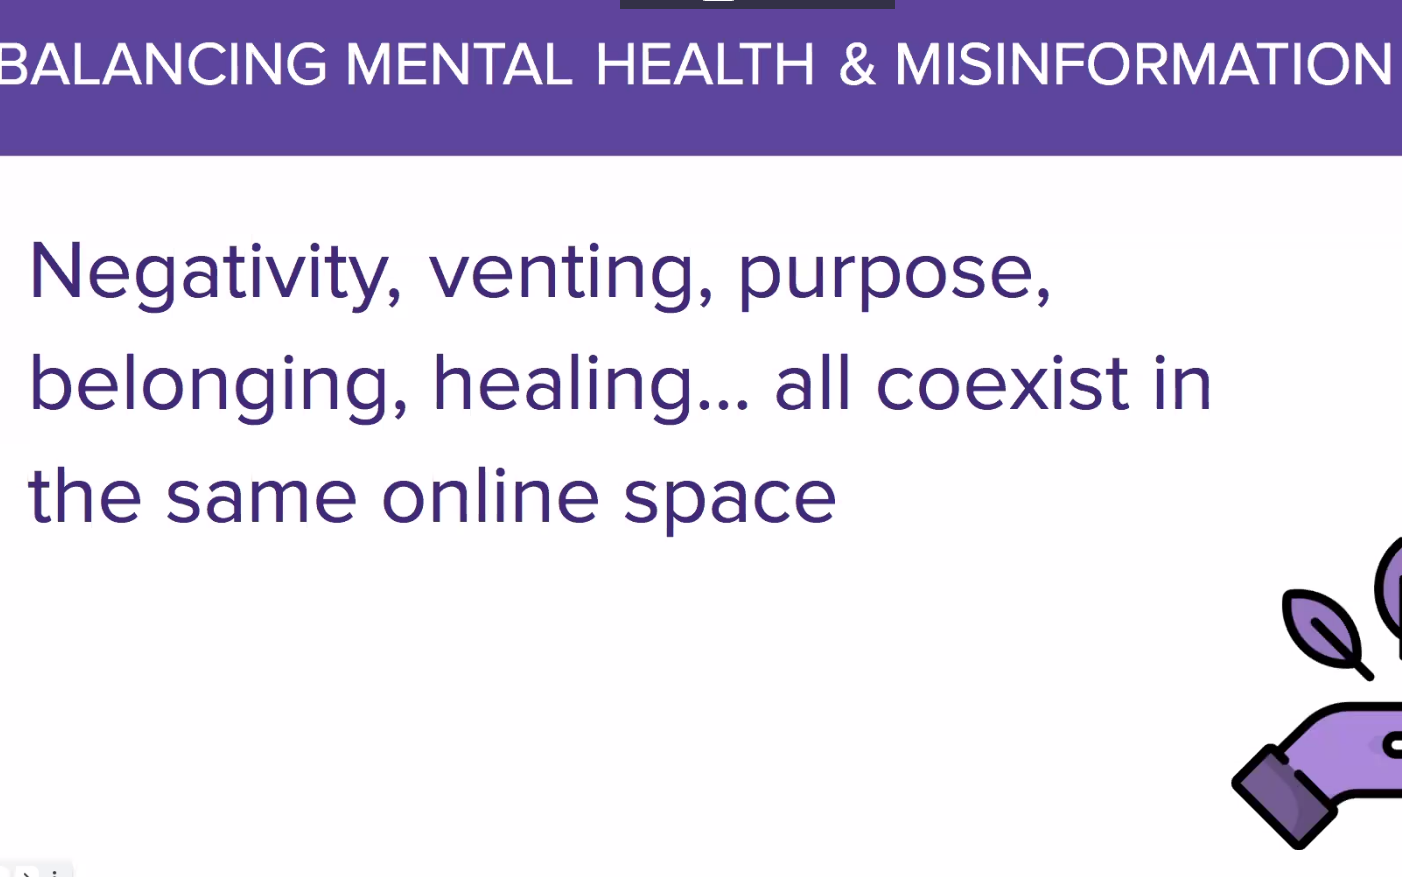 Slide with purple text with a title that reads, Balancing Mental Health and Misinformation. The body of the slides says, "Negativity, venting, purpose, belonging, healing... all coexist in the same online space"